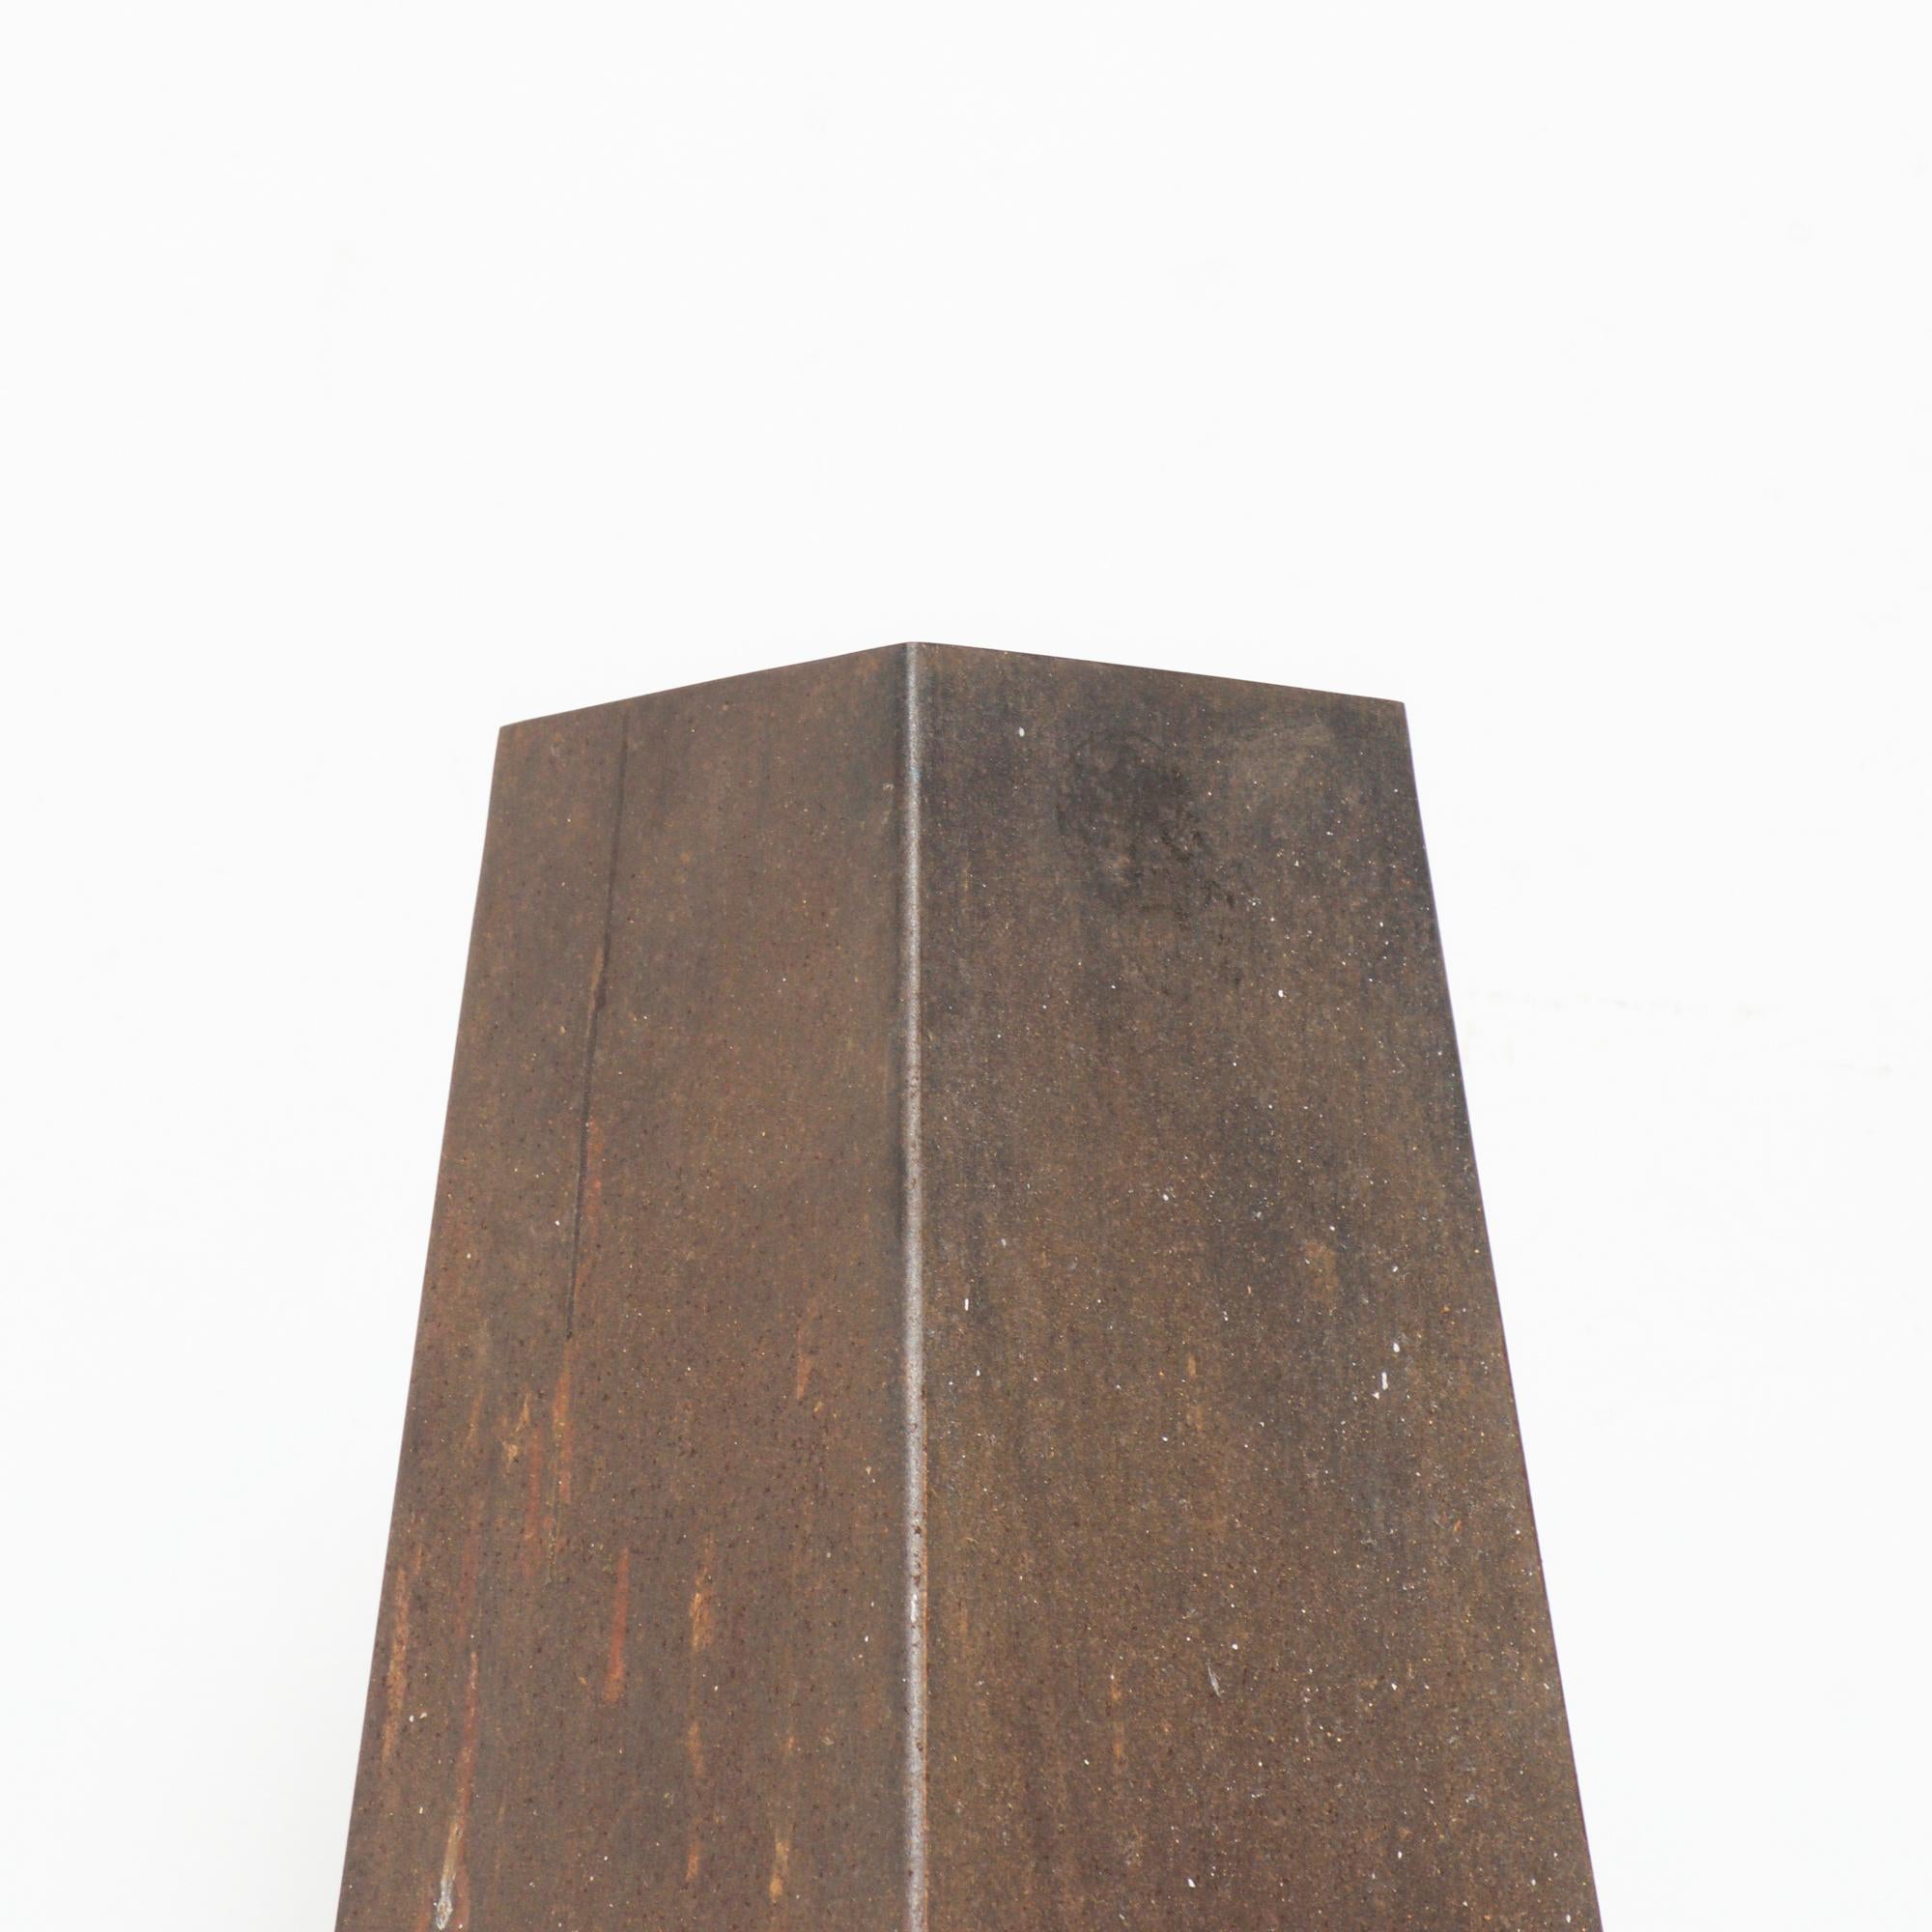 Mid-Century metal pyramid fireplace weathered outdoor obelisk vintage modern rustic firepit. 
Similar to Malm Fireplaces. Circa 1970s
Measures: 48 1/2